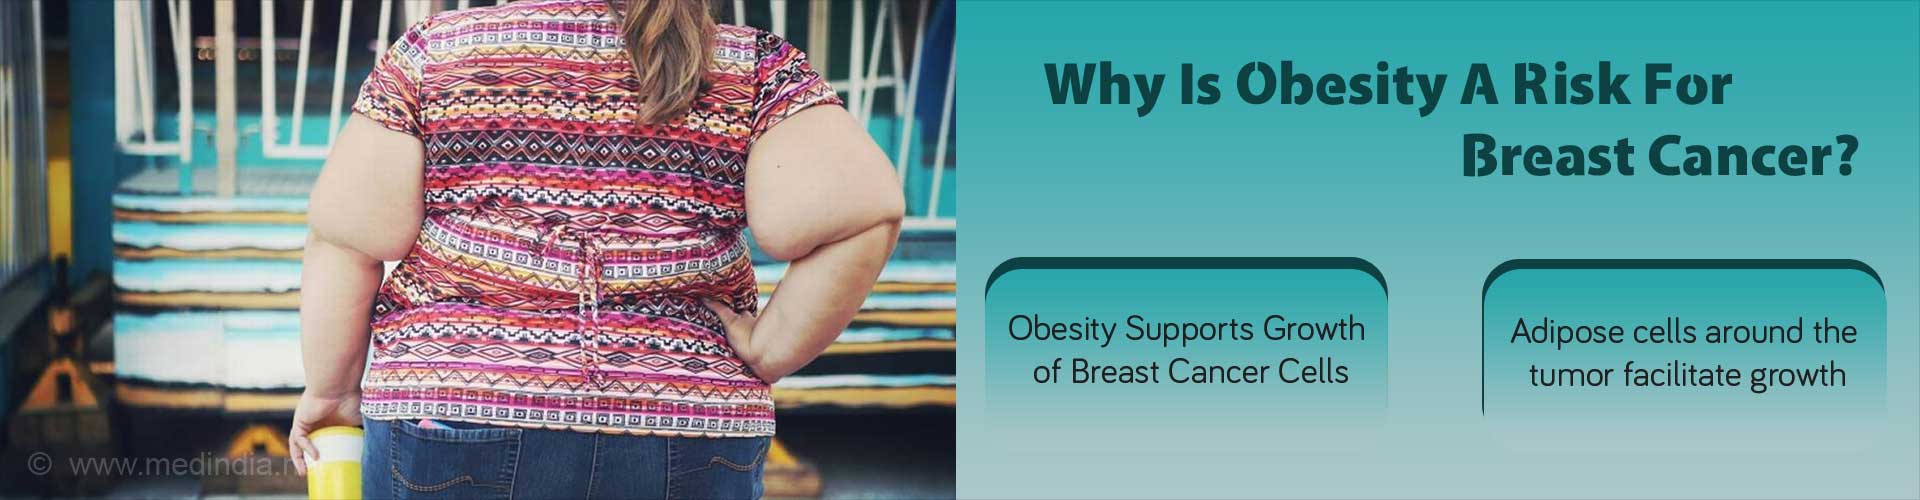 why is obesity a risk for breast cancer?
- obesity supports growth of breast cancer cells
- adipose cells around the tumor facilitate growth